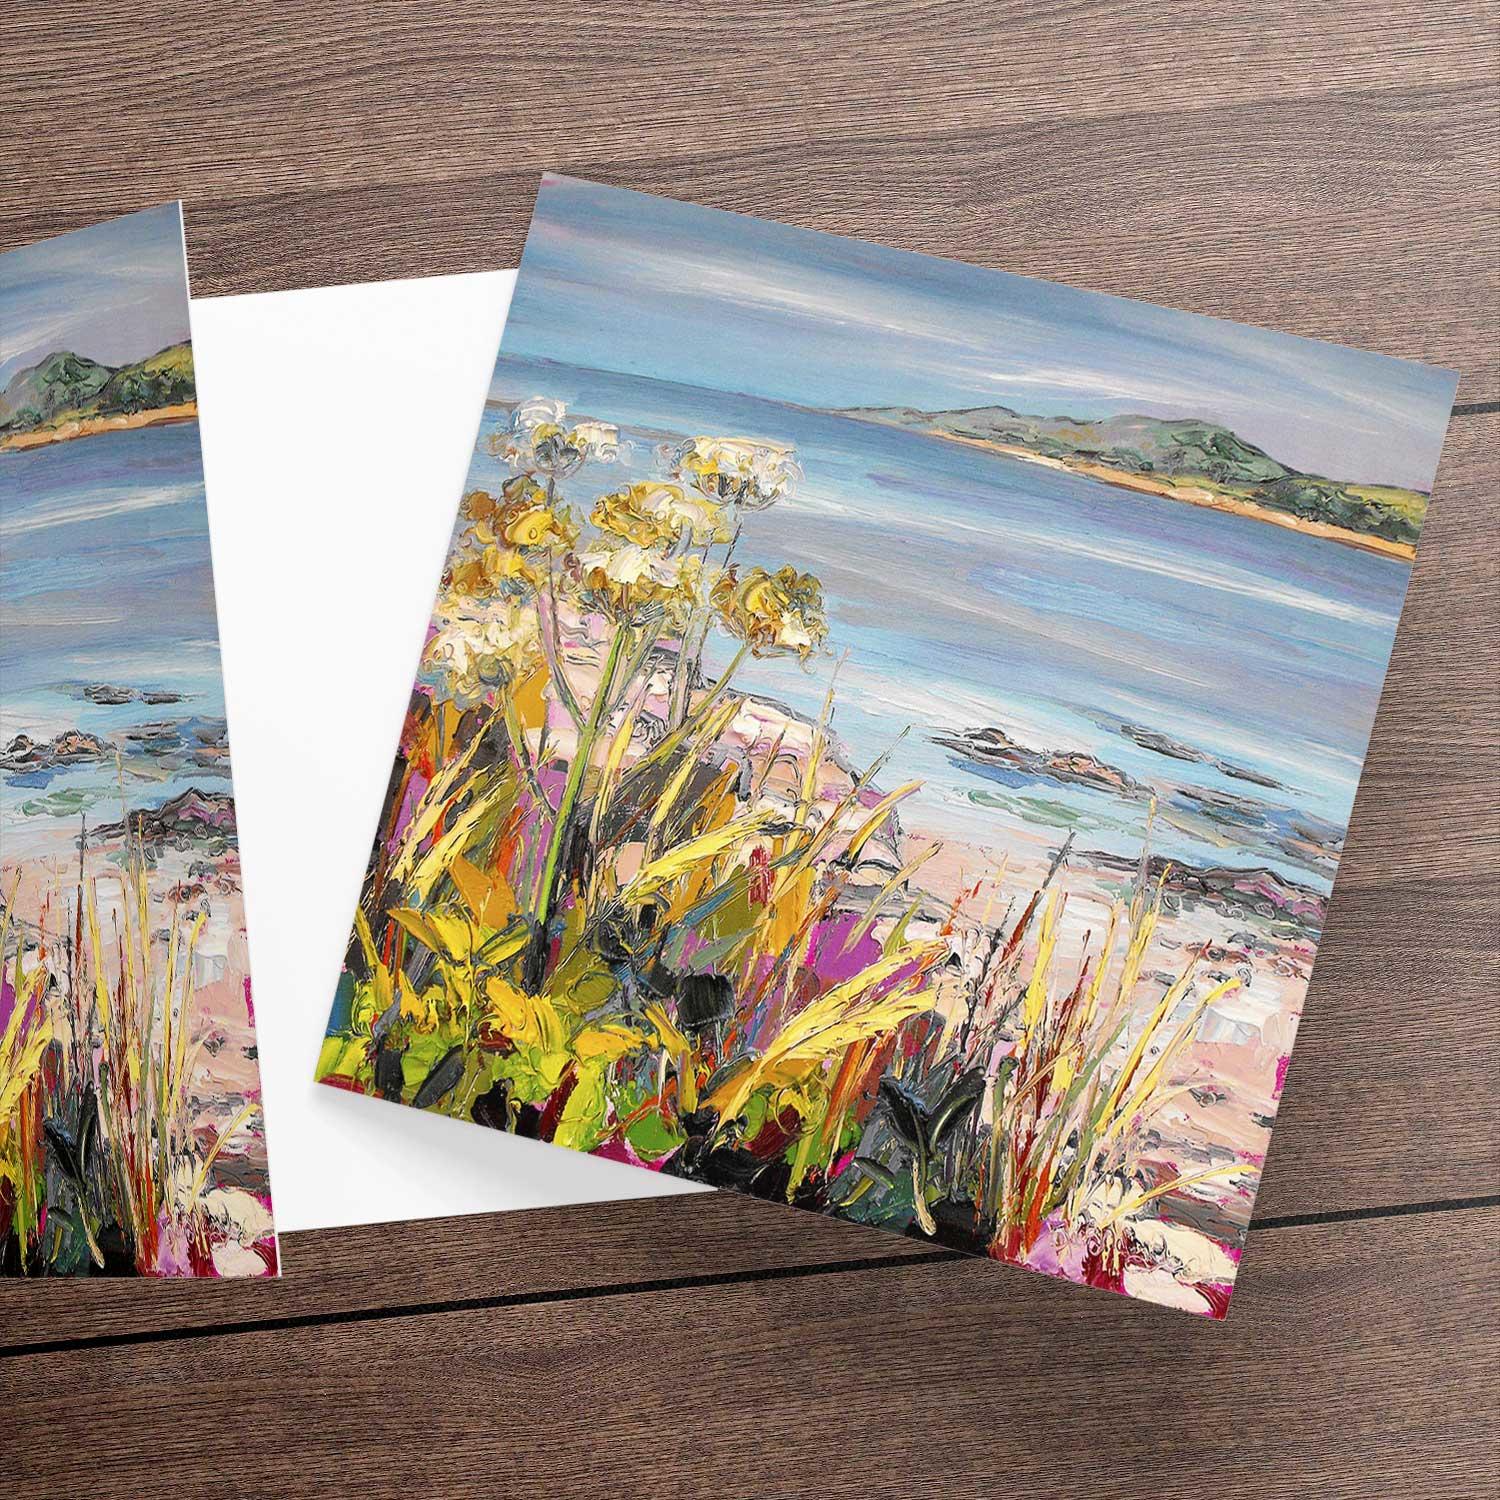 Afternoon Sun at the White Sands, Morar Greeting Card from an original painting by artist Judith I Bridgland